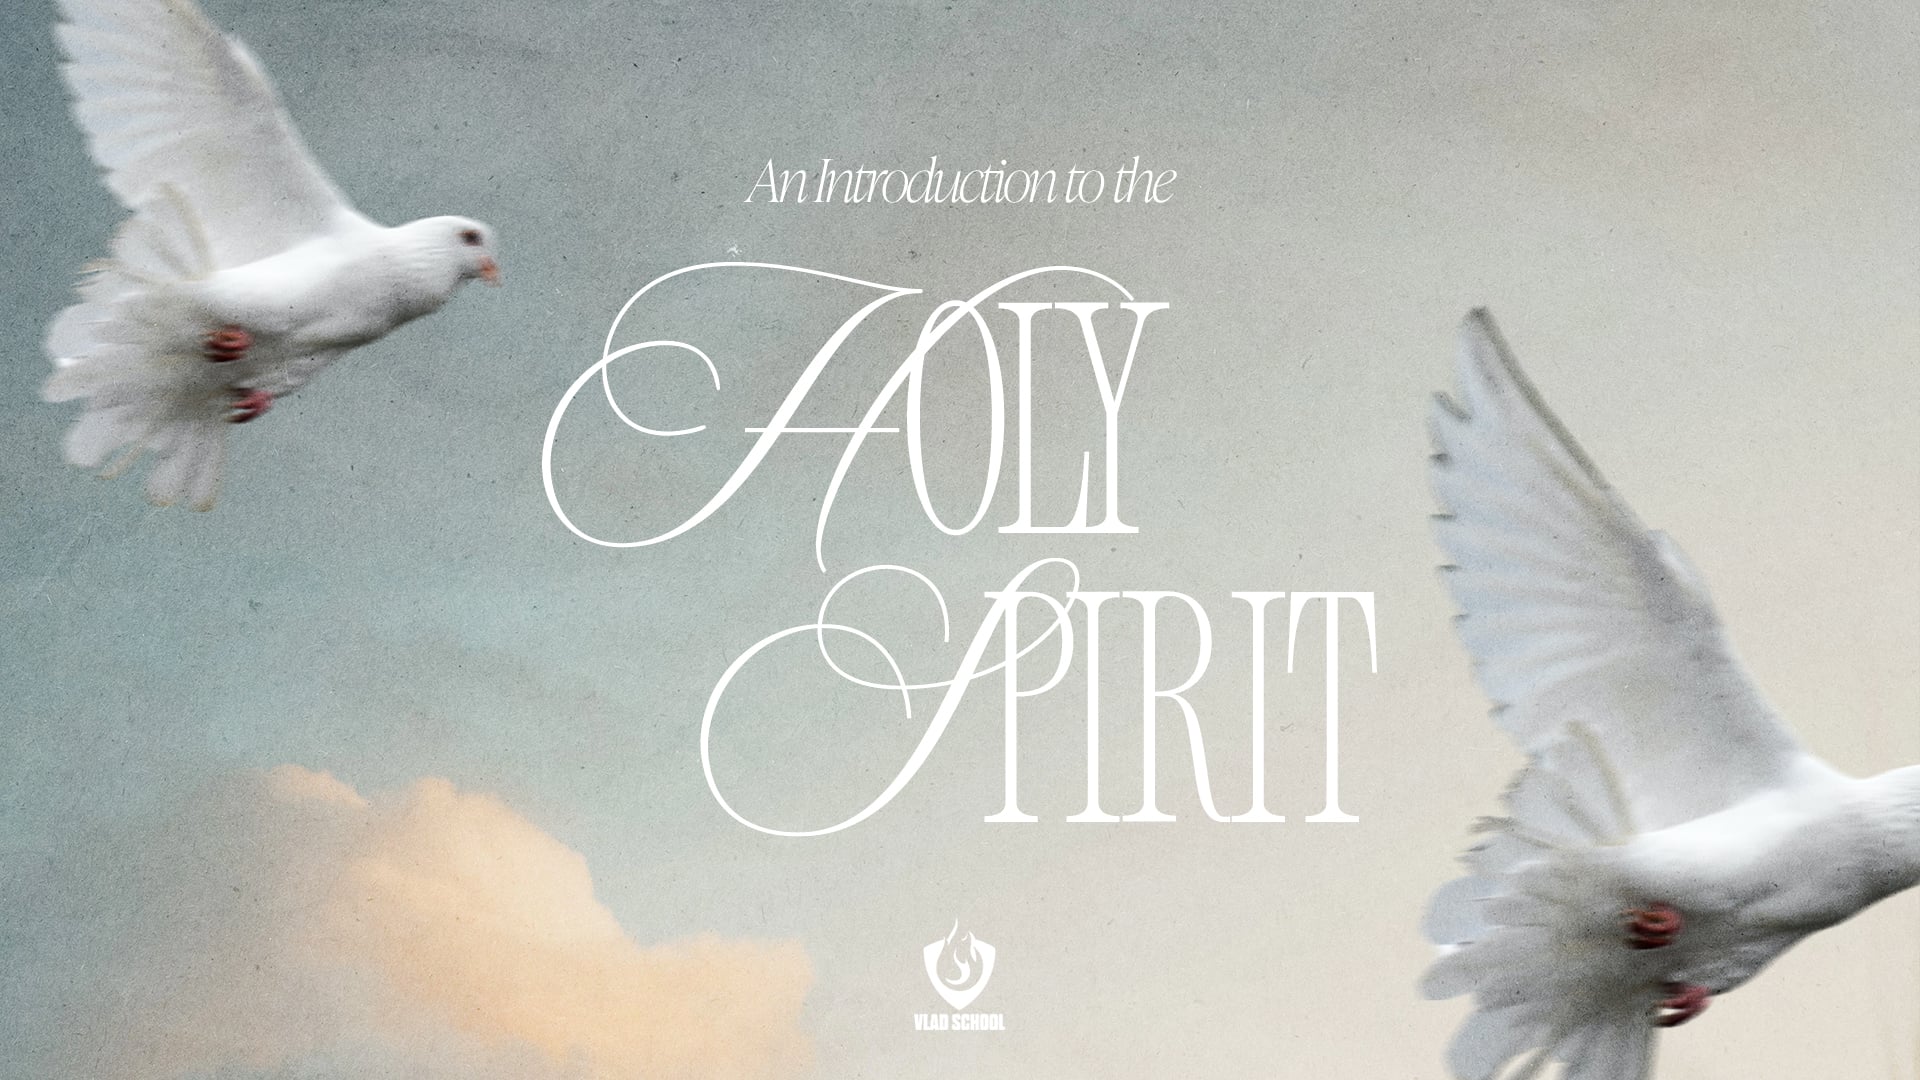 Featured Image for “An Introduction to the Holy Spirit”